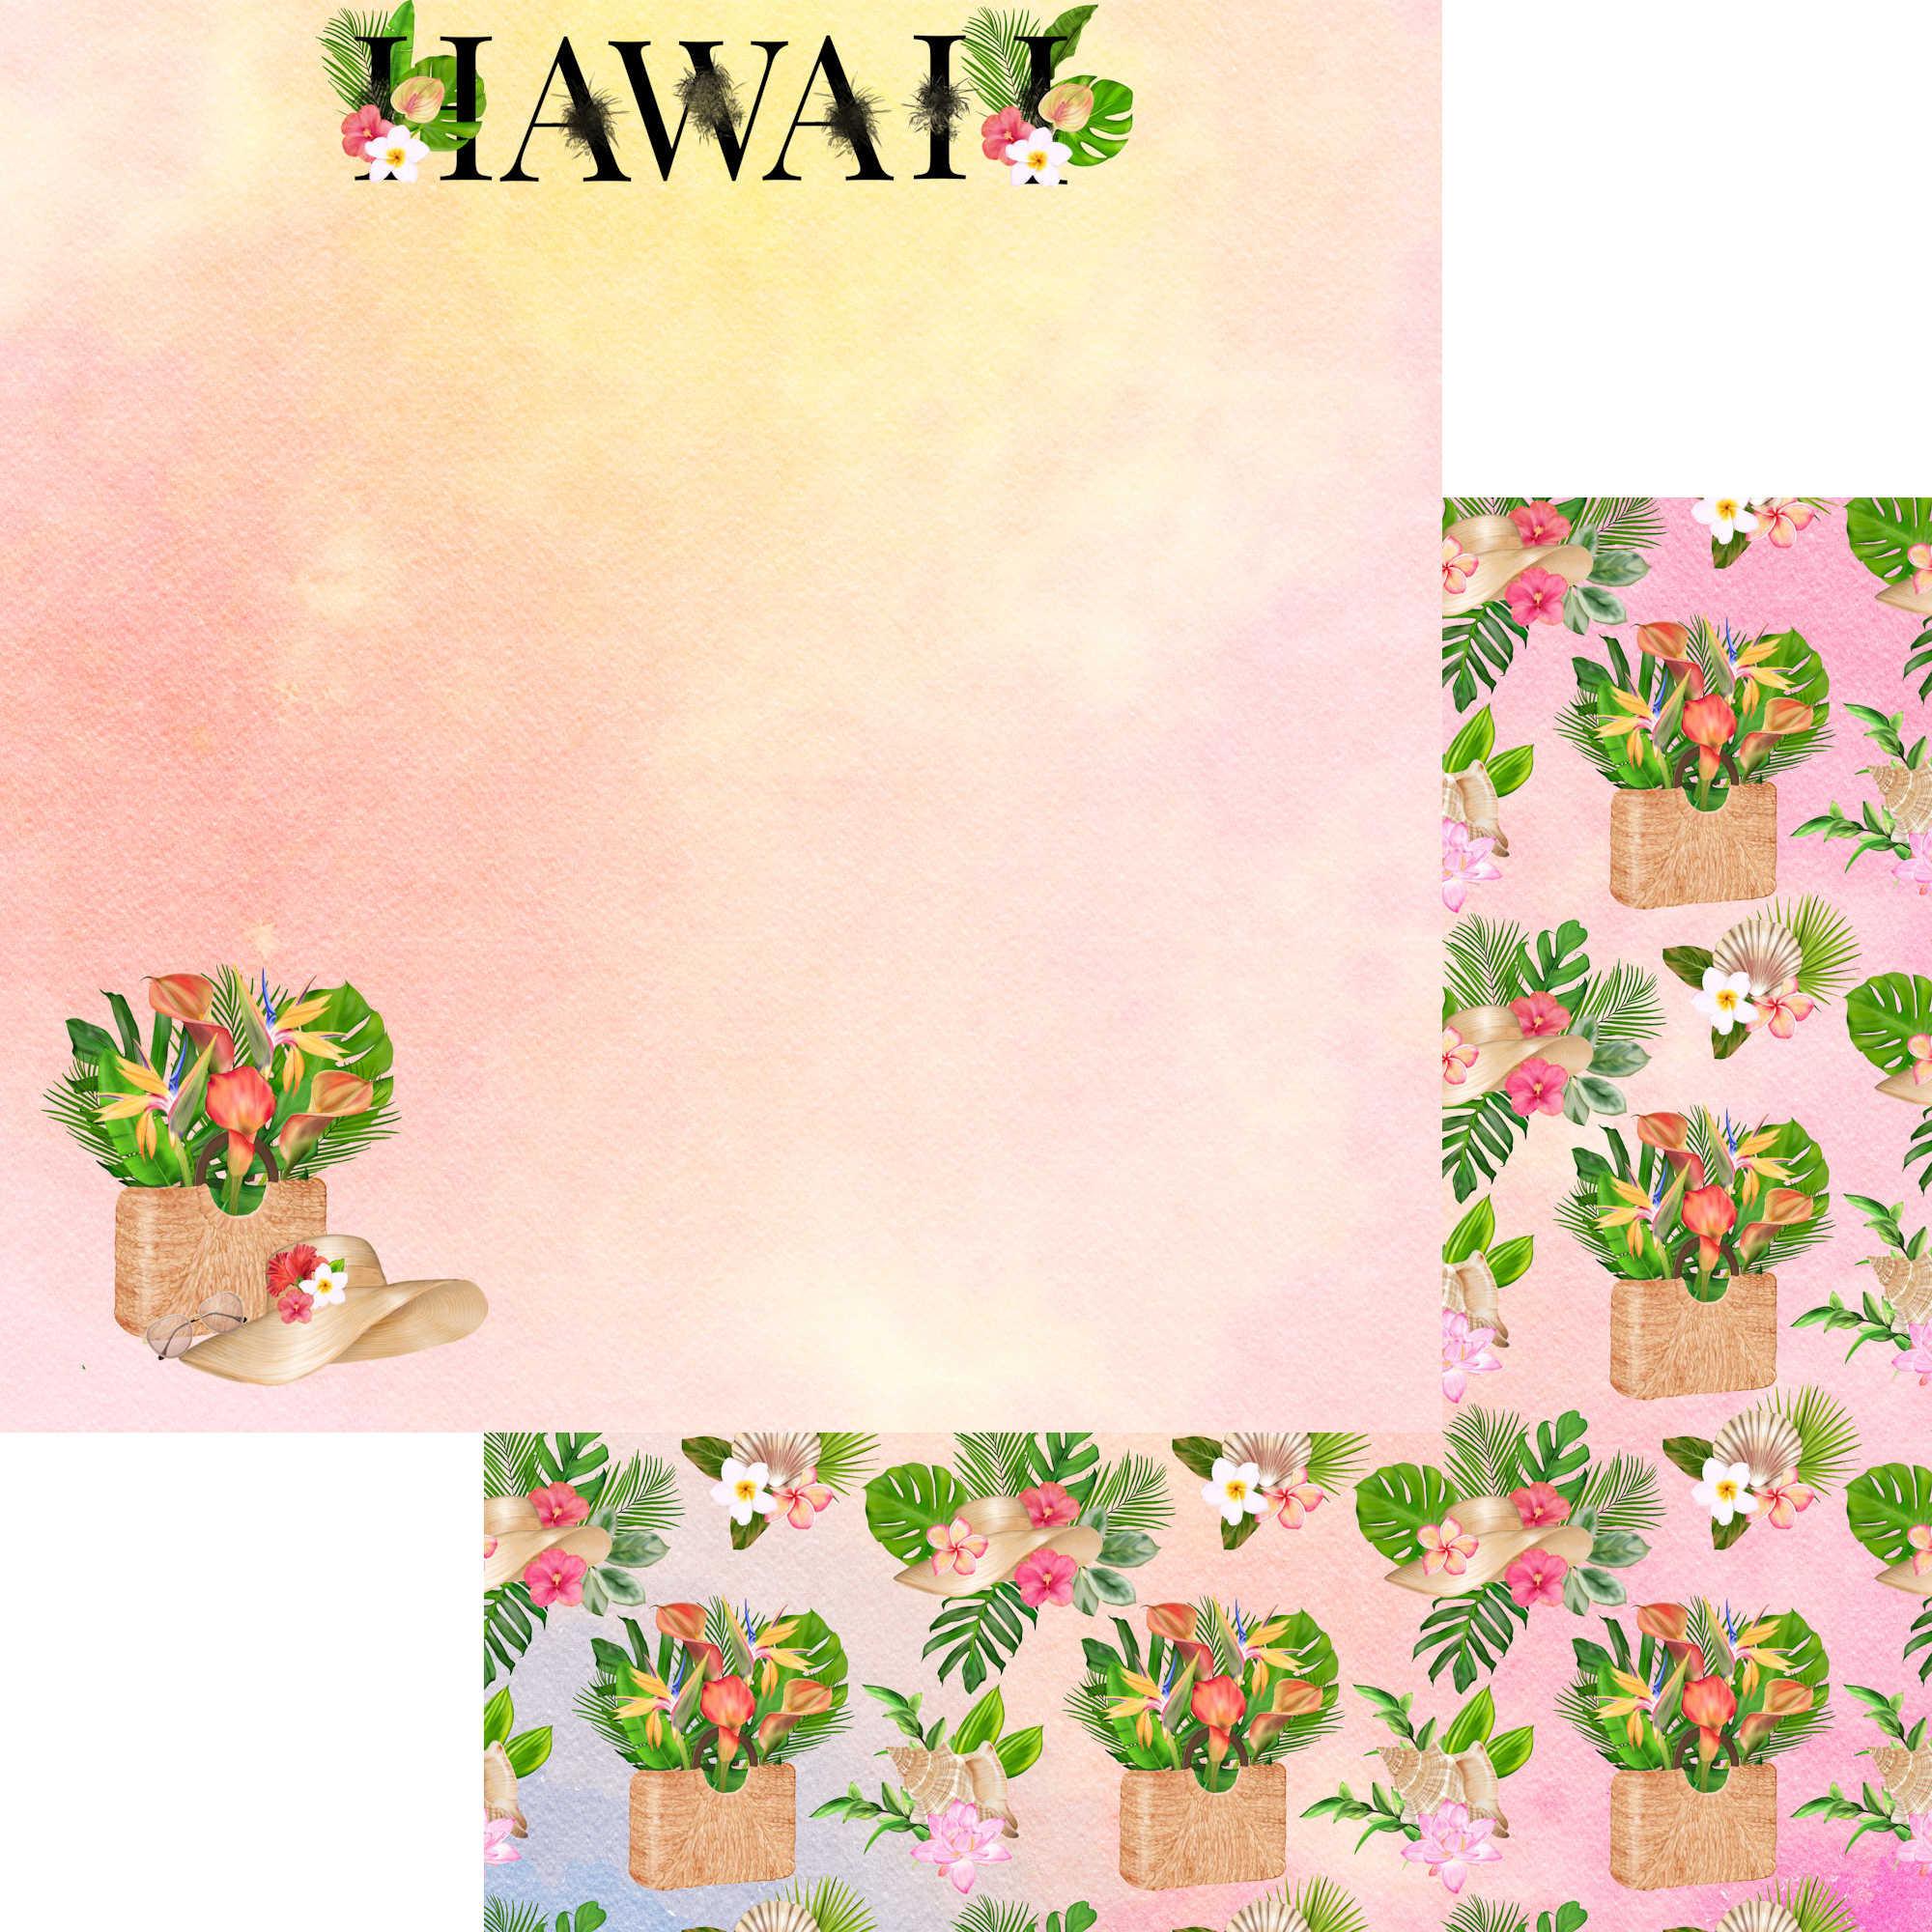 Exotic Tropics Collection Hawaii 12 x 12 Double-Sided Scrapbook Paper by SSC Designs - Scrapbook Supply Companies